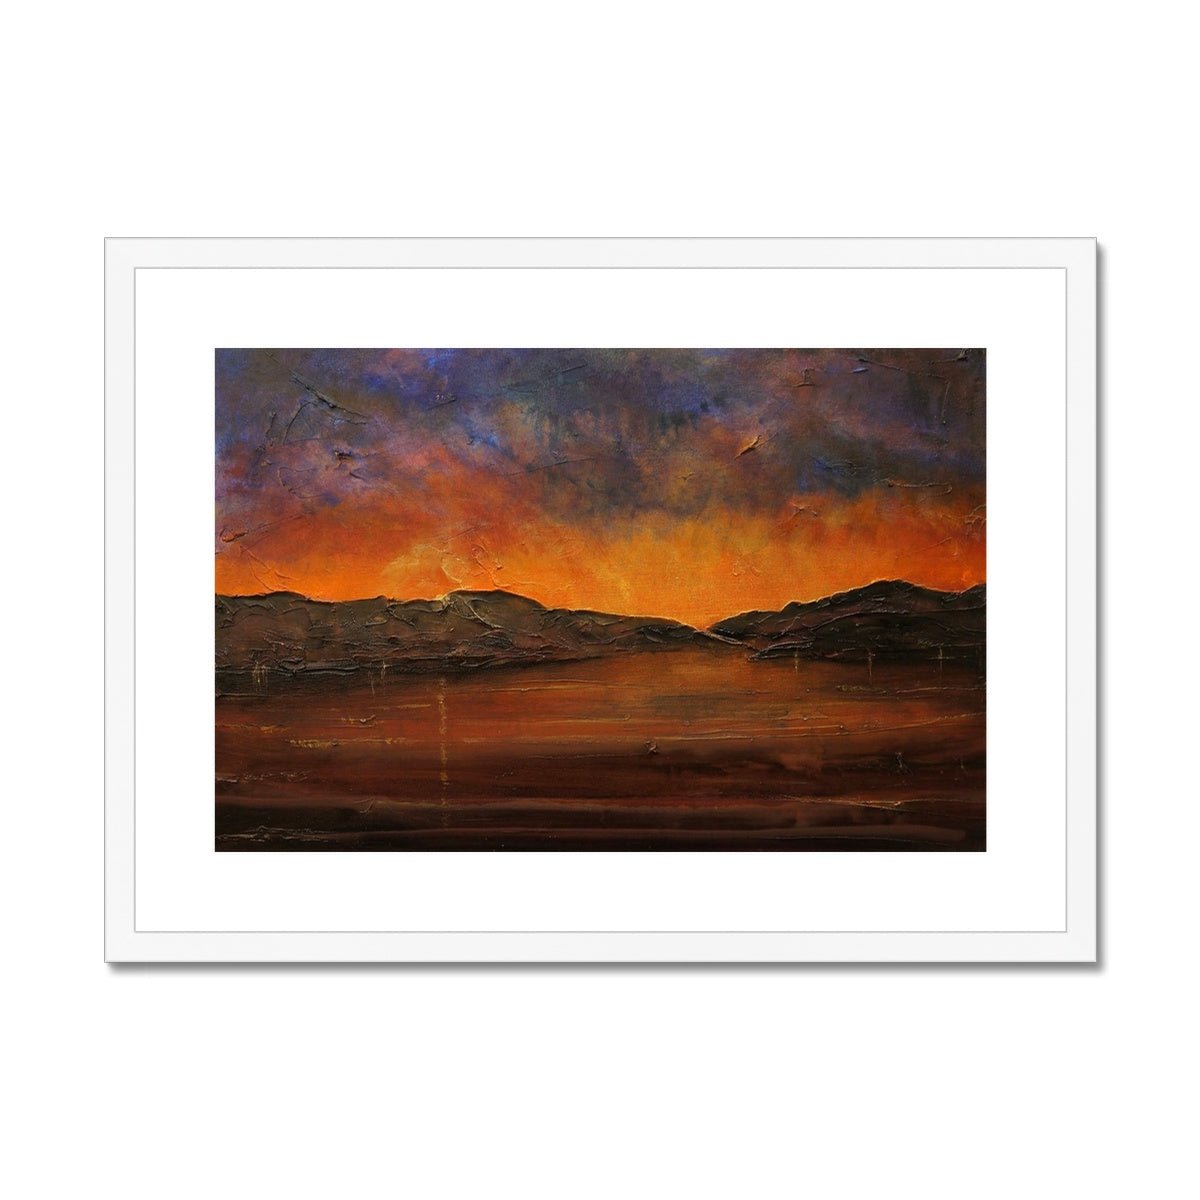 A Brooding River Clyde Dusk Painting | Framed & Mounted Prints From Scotland-Framed & Mounted Prints-River Clyde Art Gallery-A2 Landscape-White Frame-Paintings, Prints, Homeware, Art Gifts From Scotland By Scottish Artist Kevin Hunter